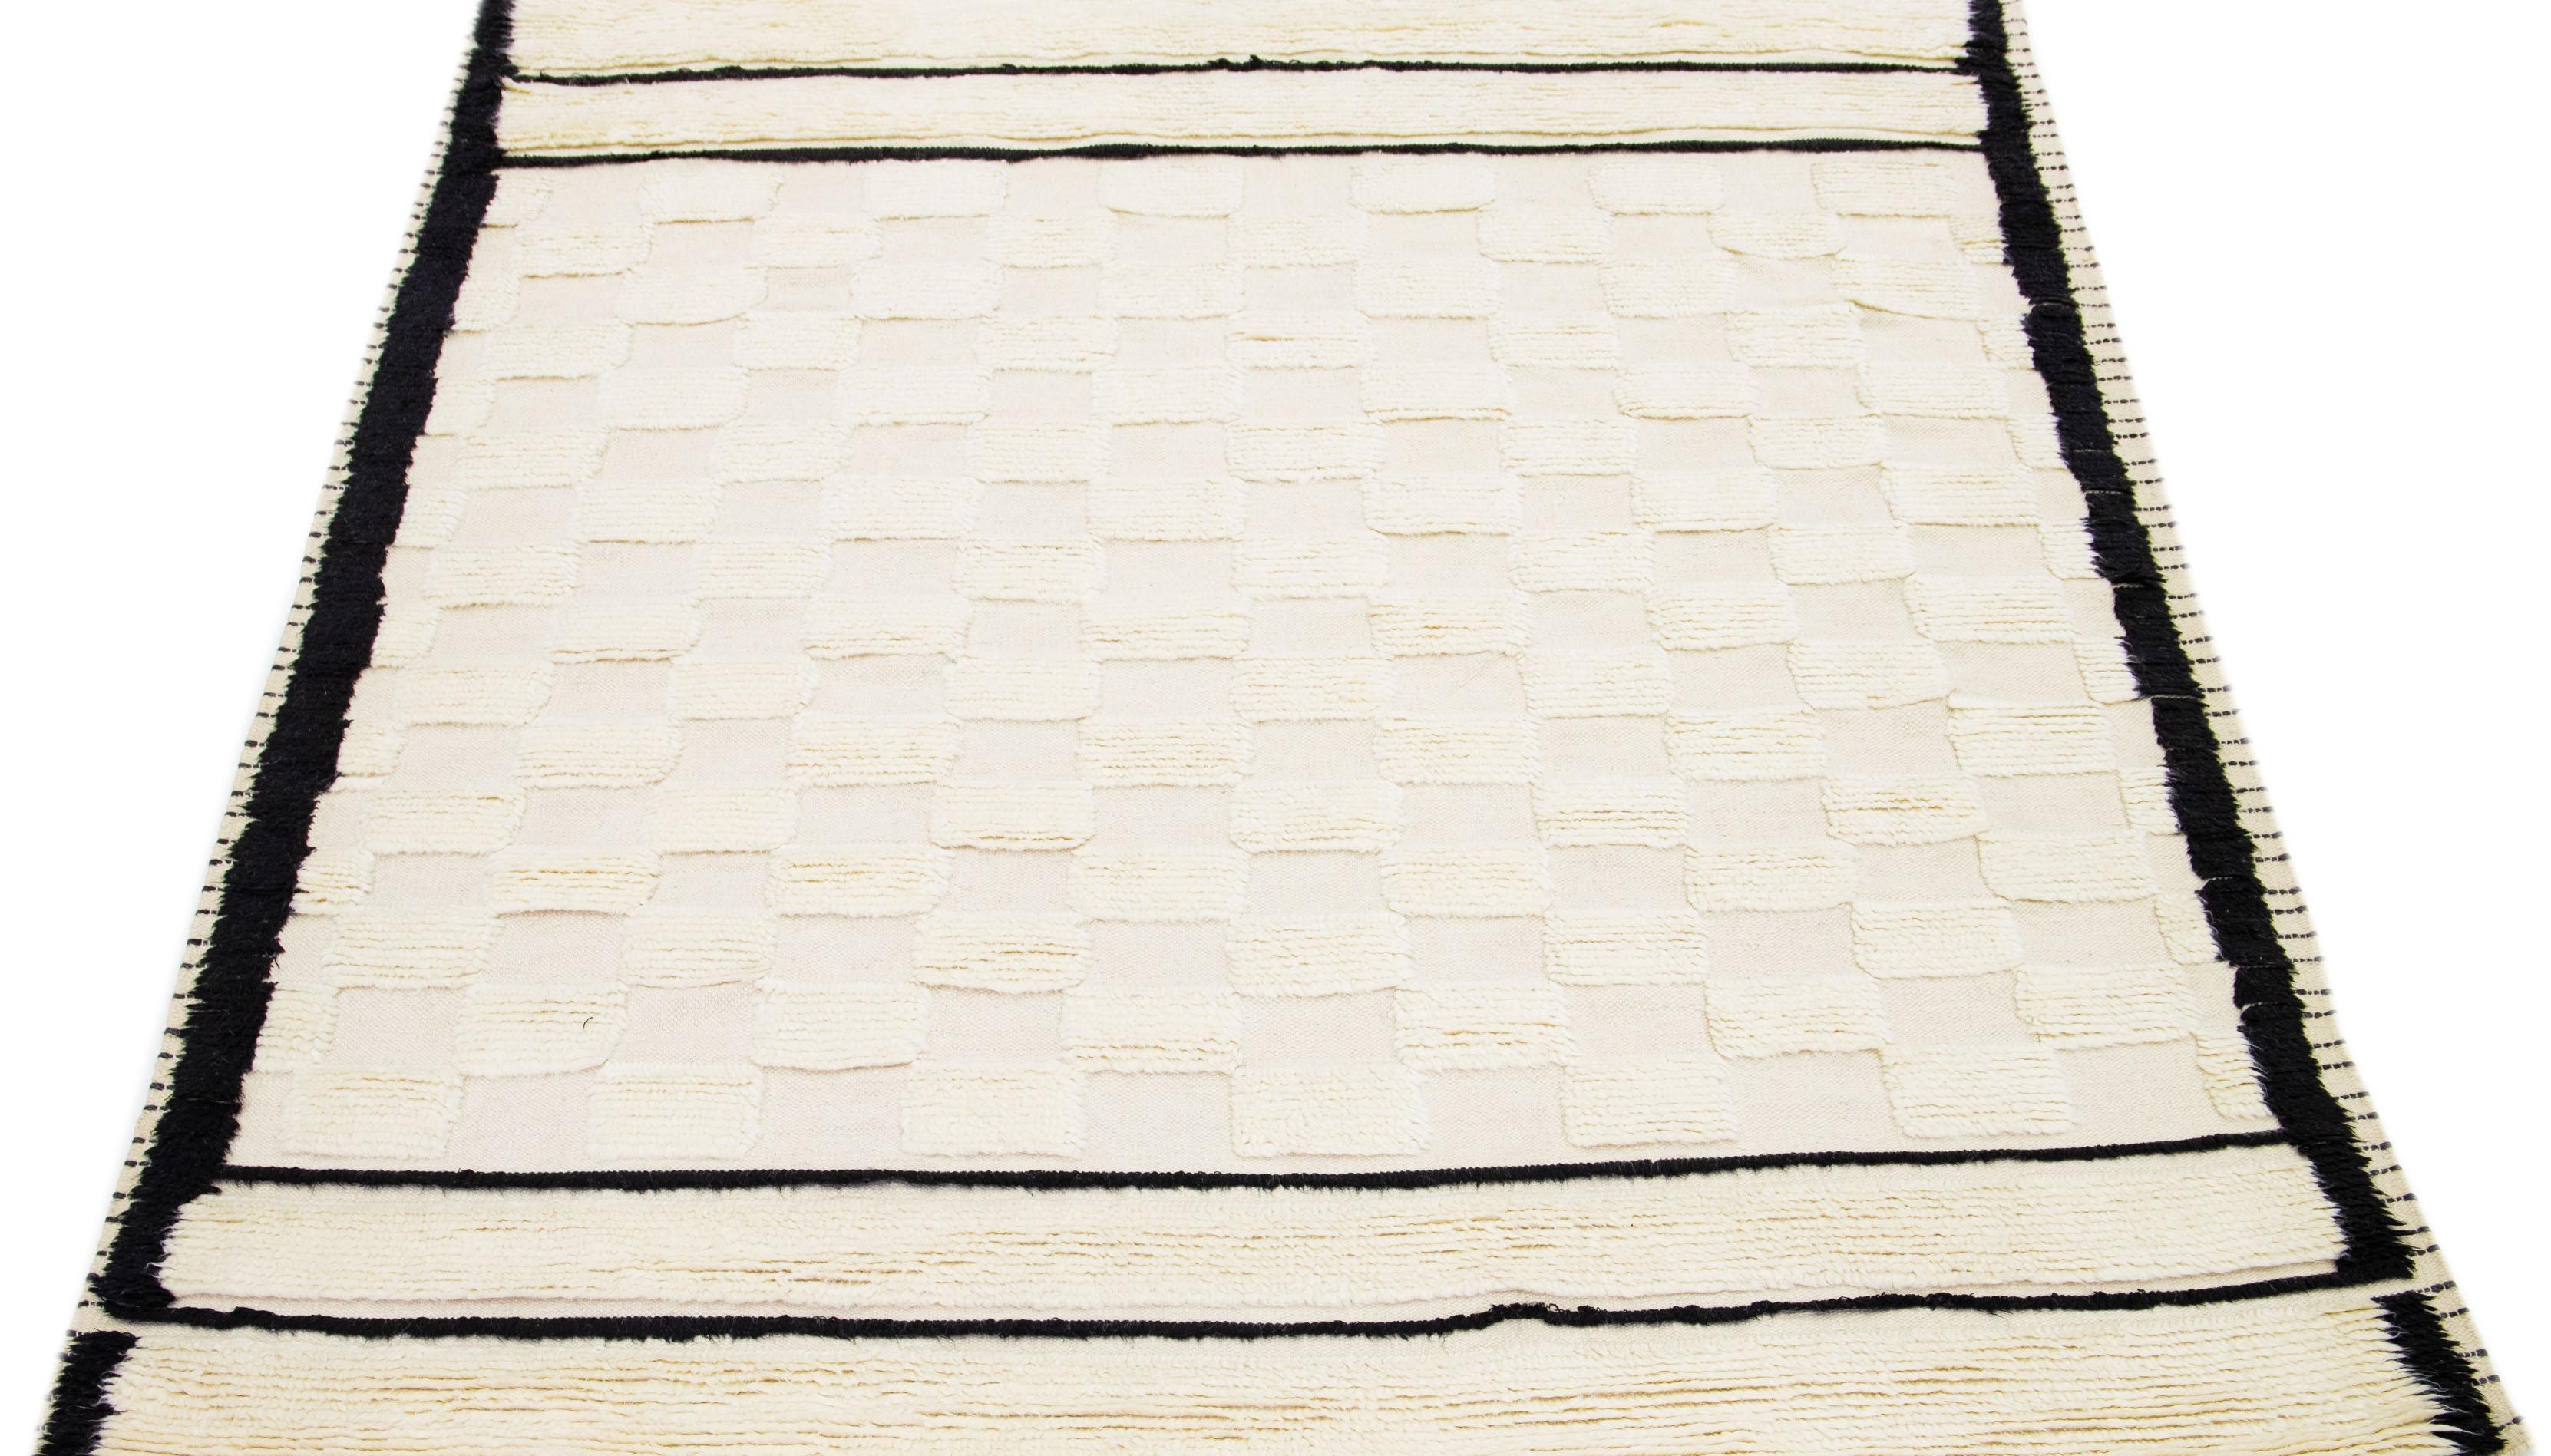 This Modern rug features a subtle background and perfectly complements the carefully handcrafted wool rug adorned with a stunning modern Moroccan design. The exquisite combination of soft ivory colors creates a beautiful checker pattern to capture